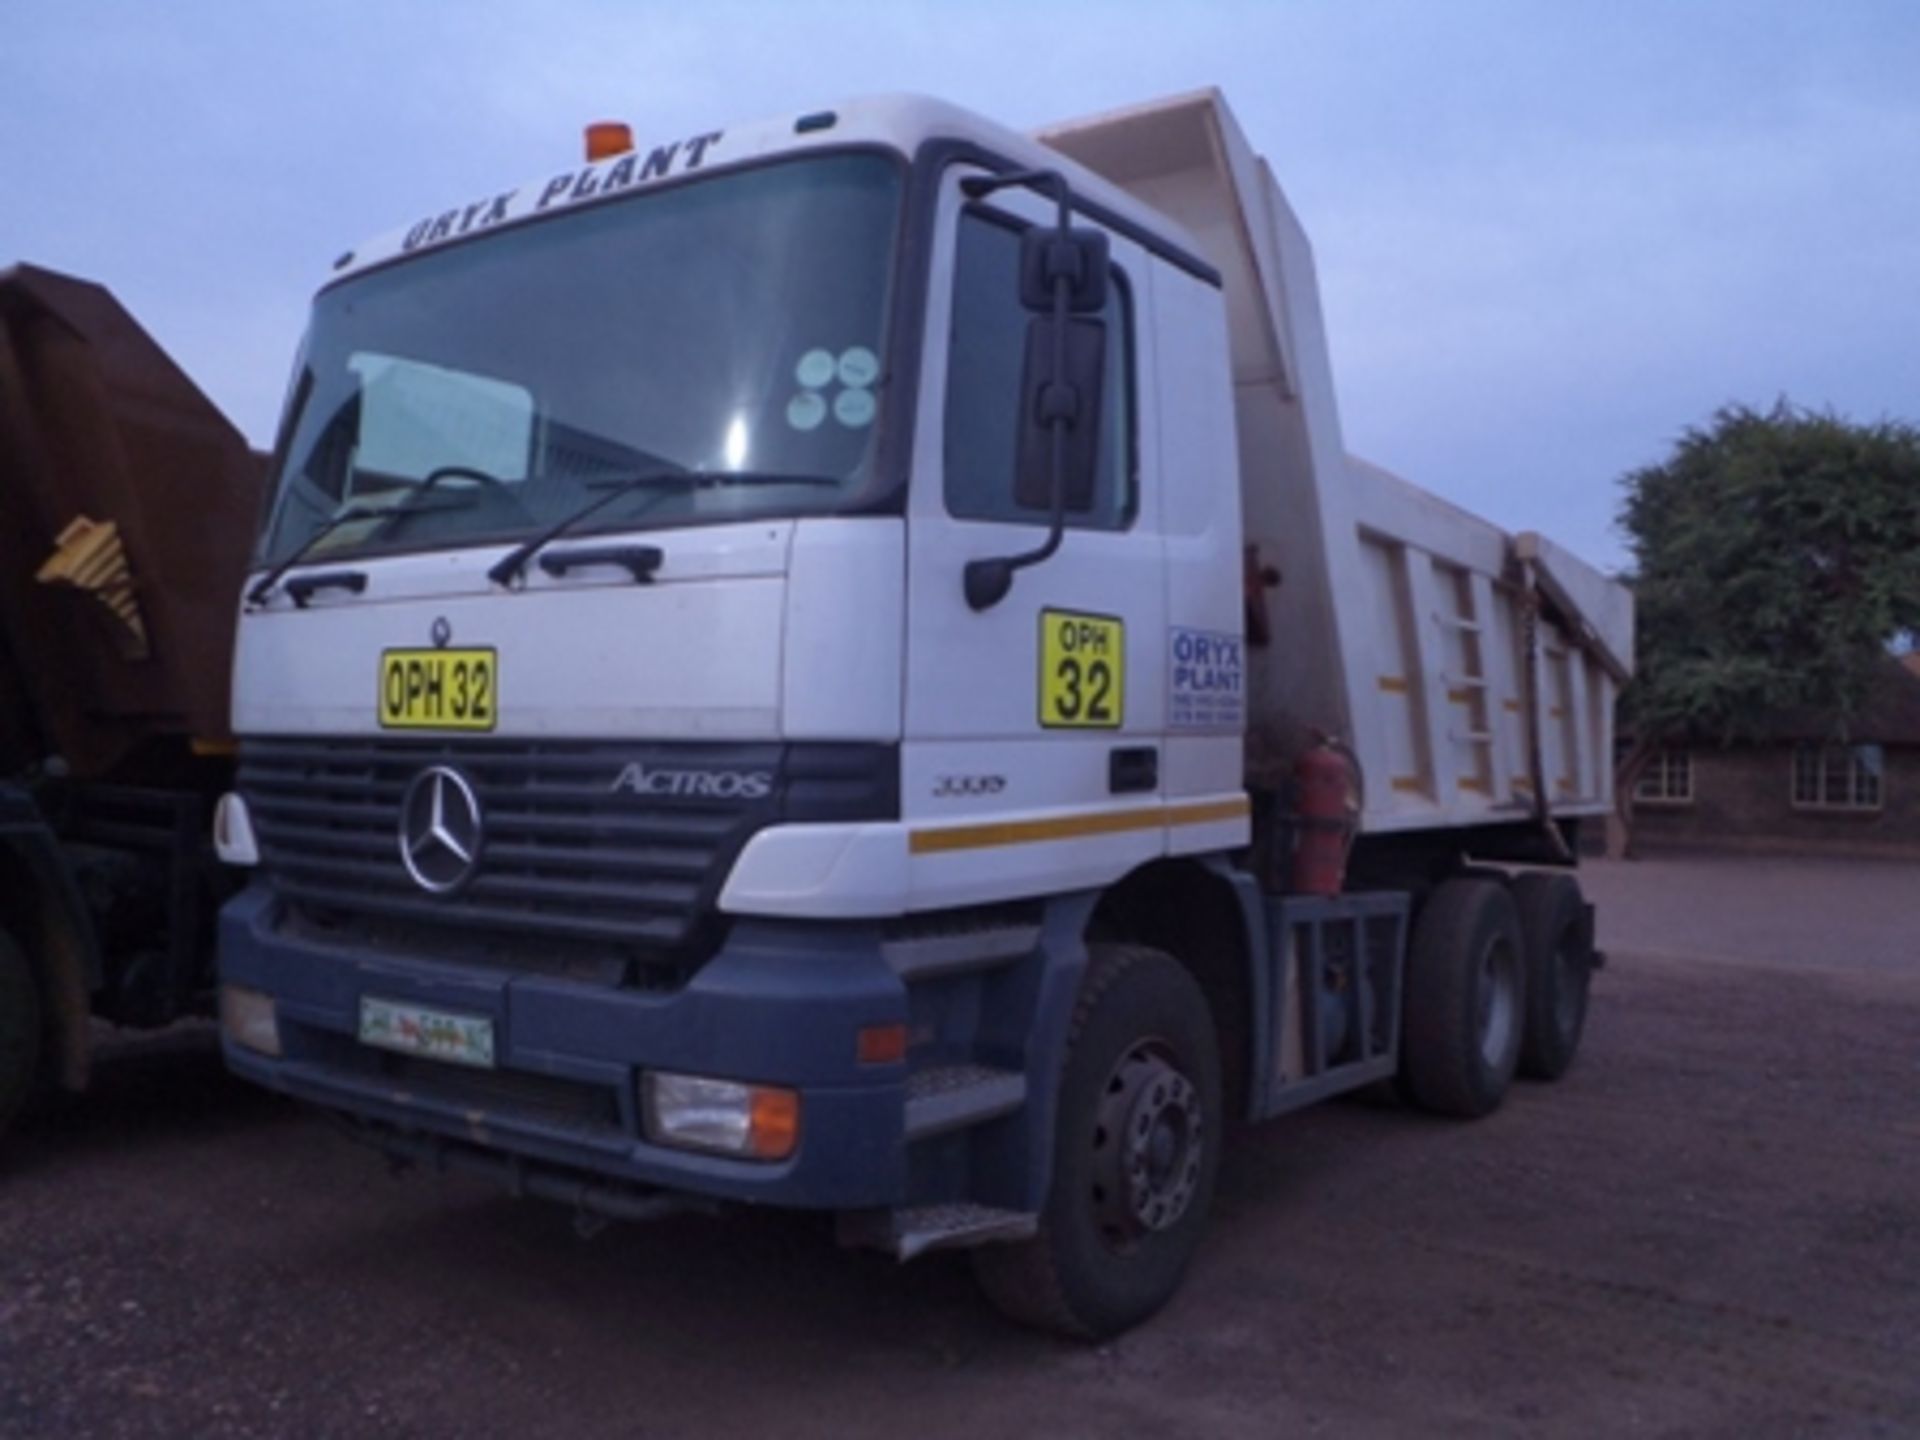 2003 MERCEDES BENZ ACTROS 3335 10M³ TIPPER TRUCK  KM 345362(23 ASBES STR, KATHU  NORTHERN CAPE) - Image 4 of 9